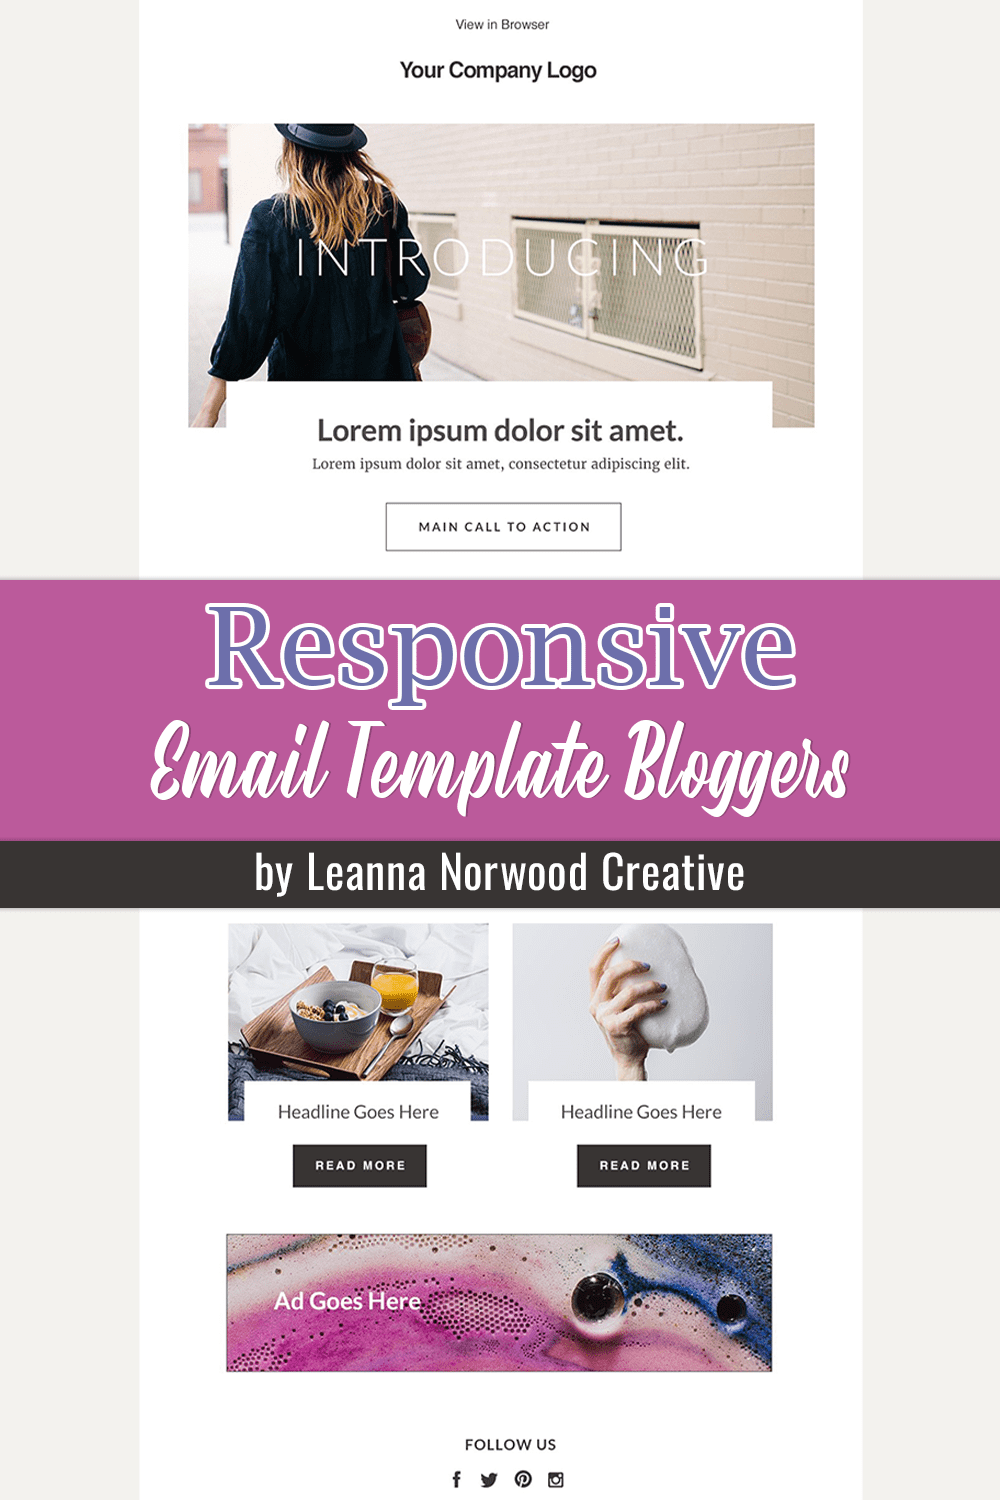 An image pack of an amazing email design template for bloggers.